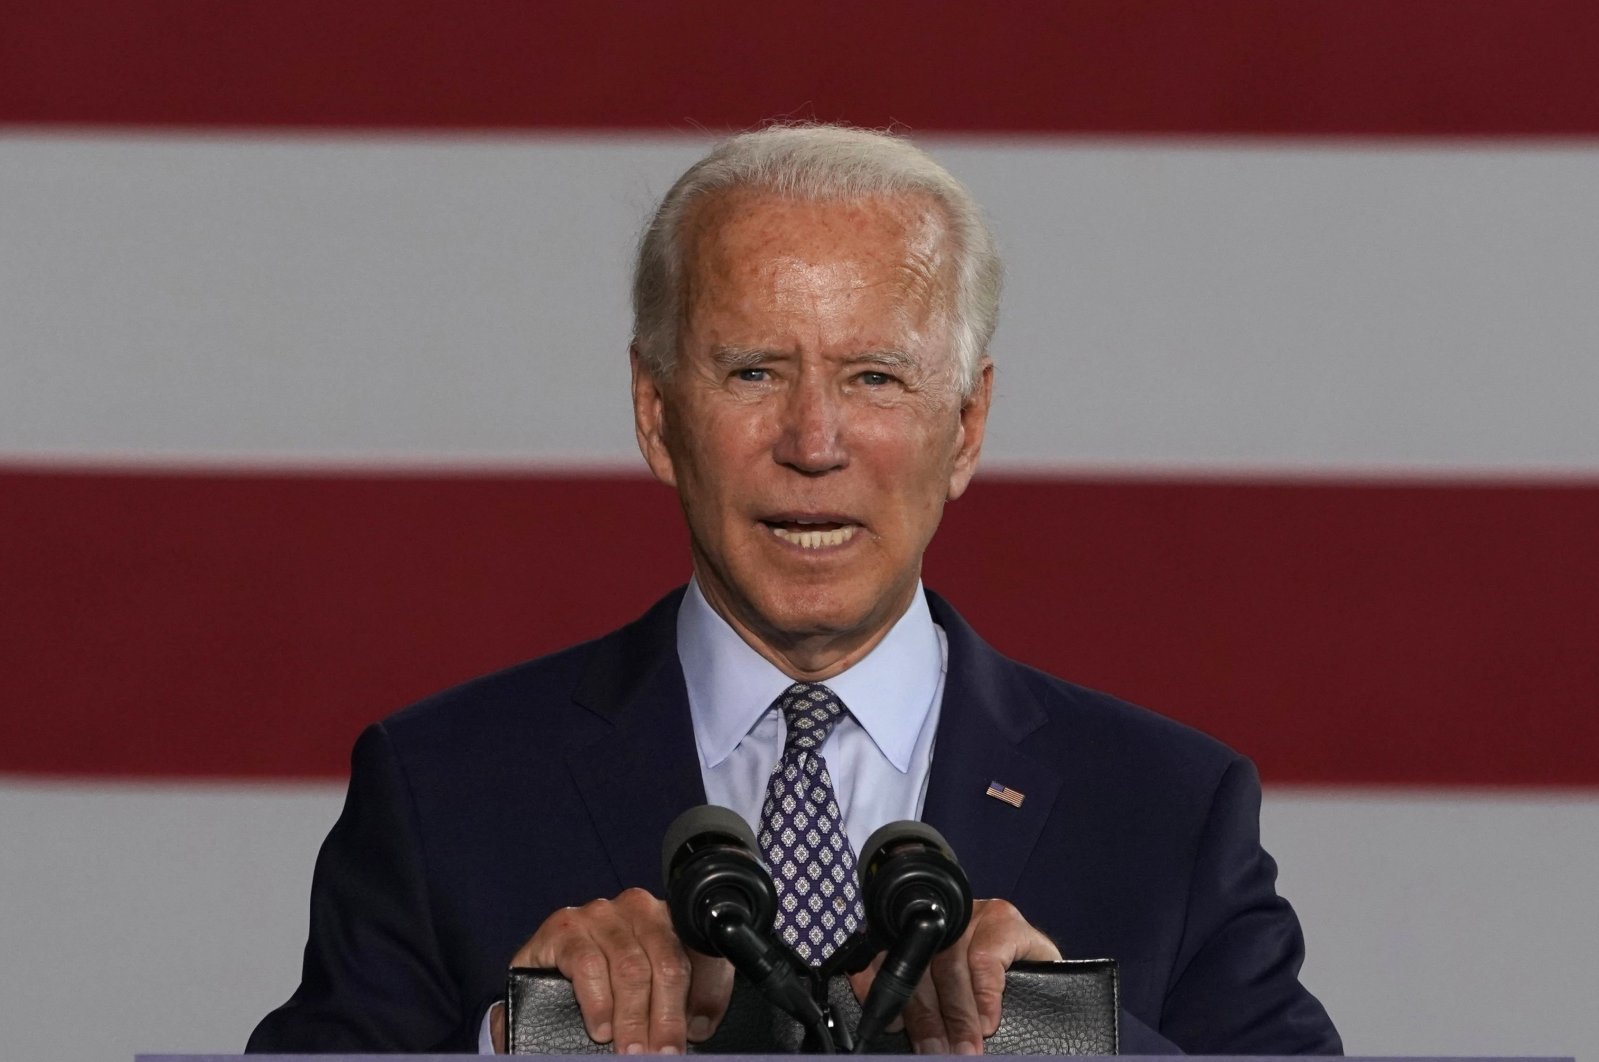 Democratic nominee for president Joe Biden gives a speech to workers after touring McGregor Industries in Dunmore, Pennsylvania, U.S., on July 9, 2020. (AFP Photo)